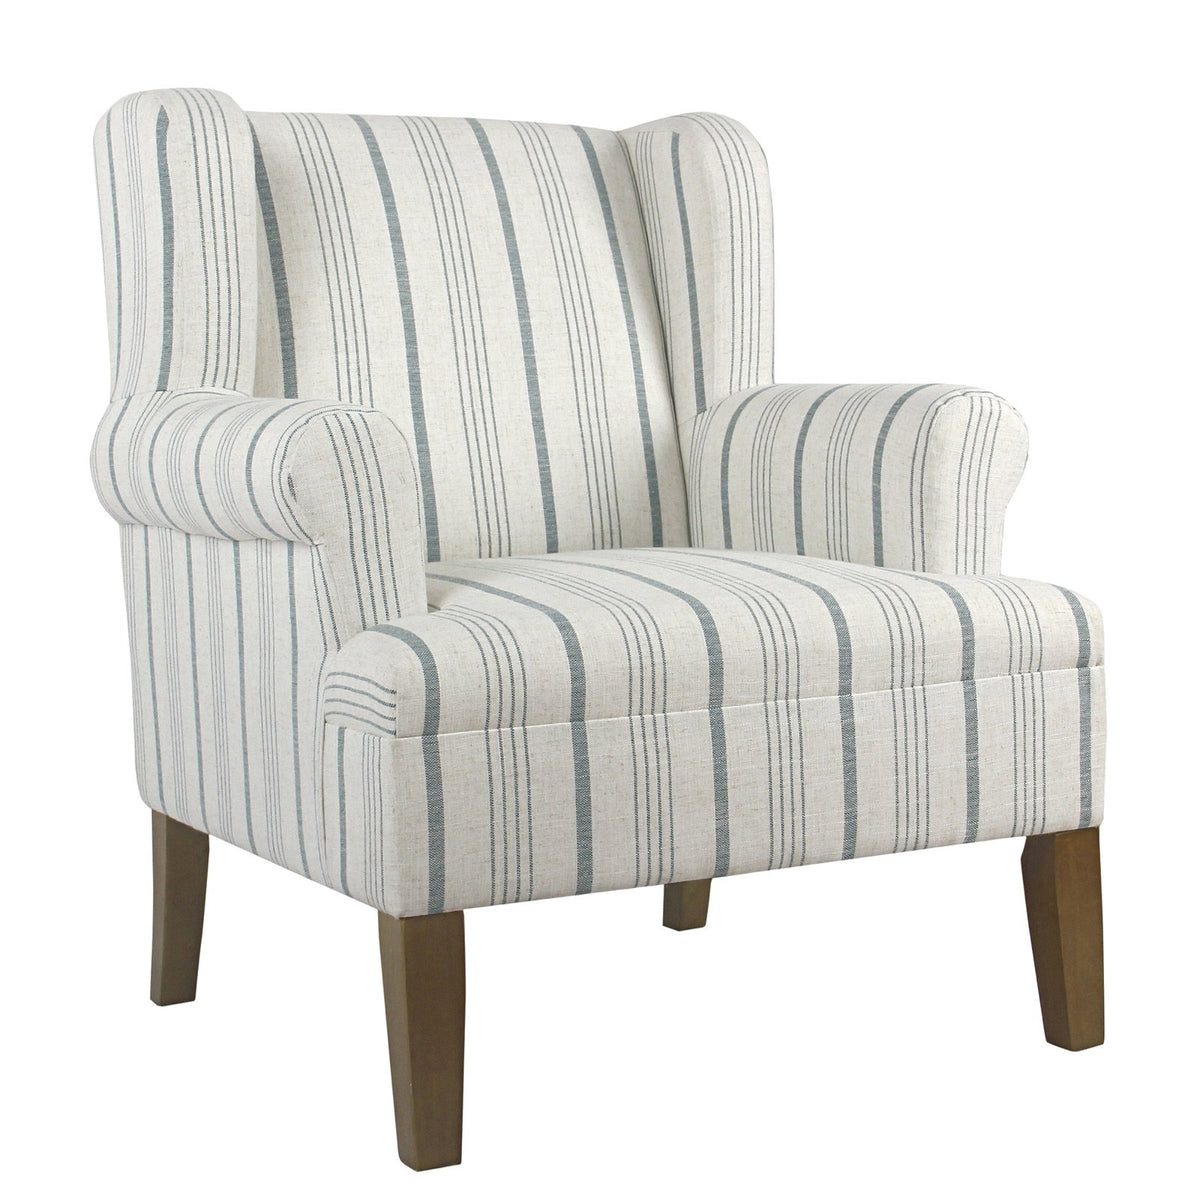 BM194021 - Fabric Upholstered Wooden Accent Chair with Wing Back, Multicolor